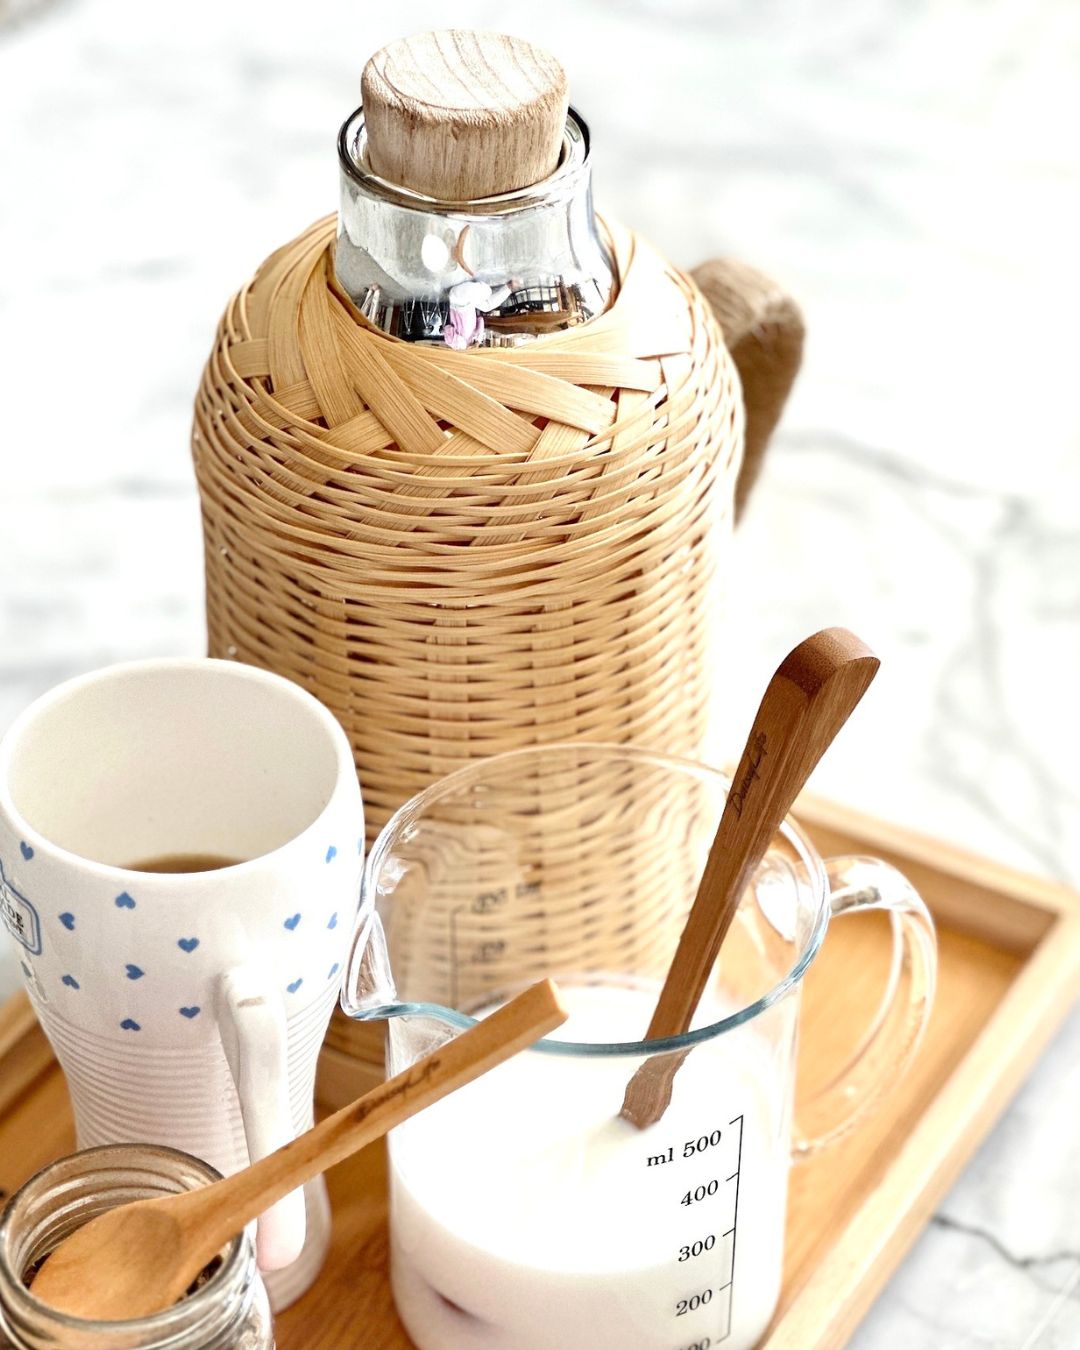 Bamboo Flask and wooden spoon in a breakfast setting